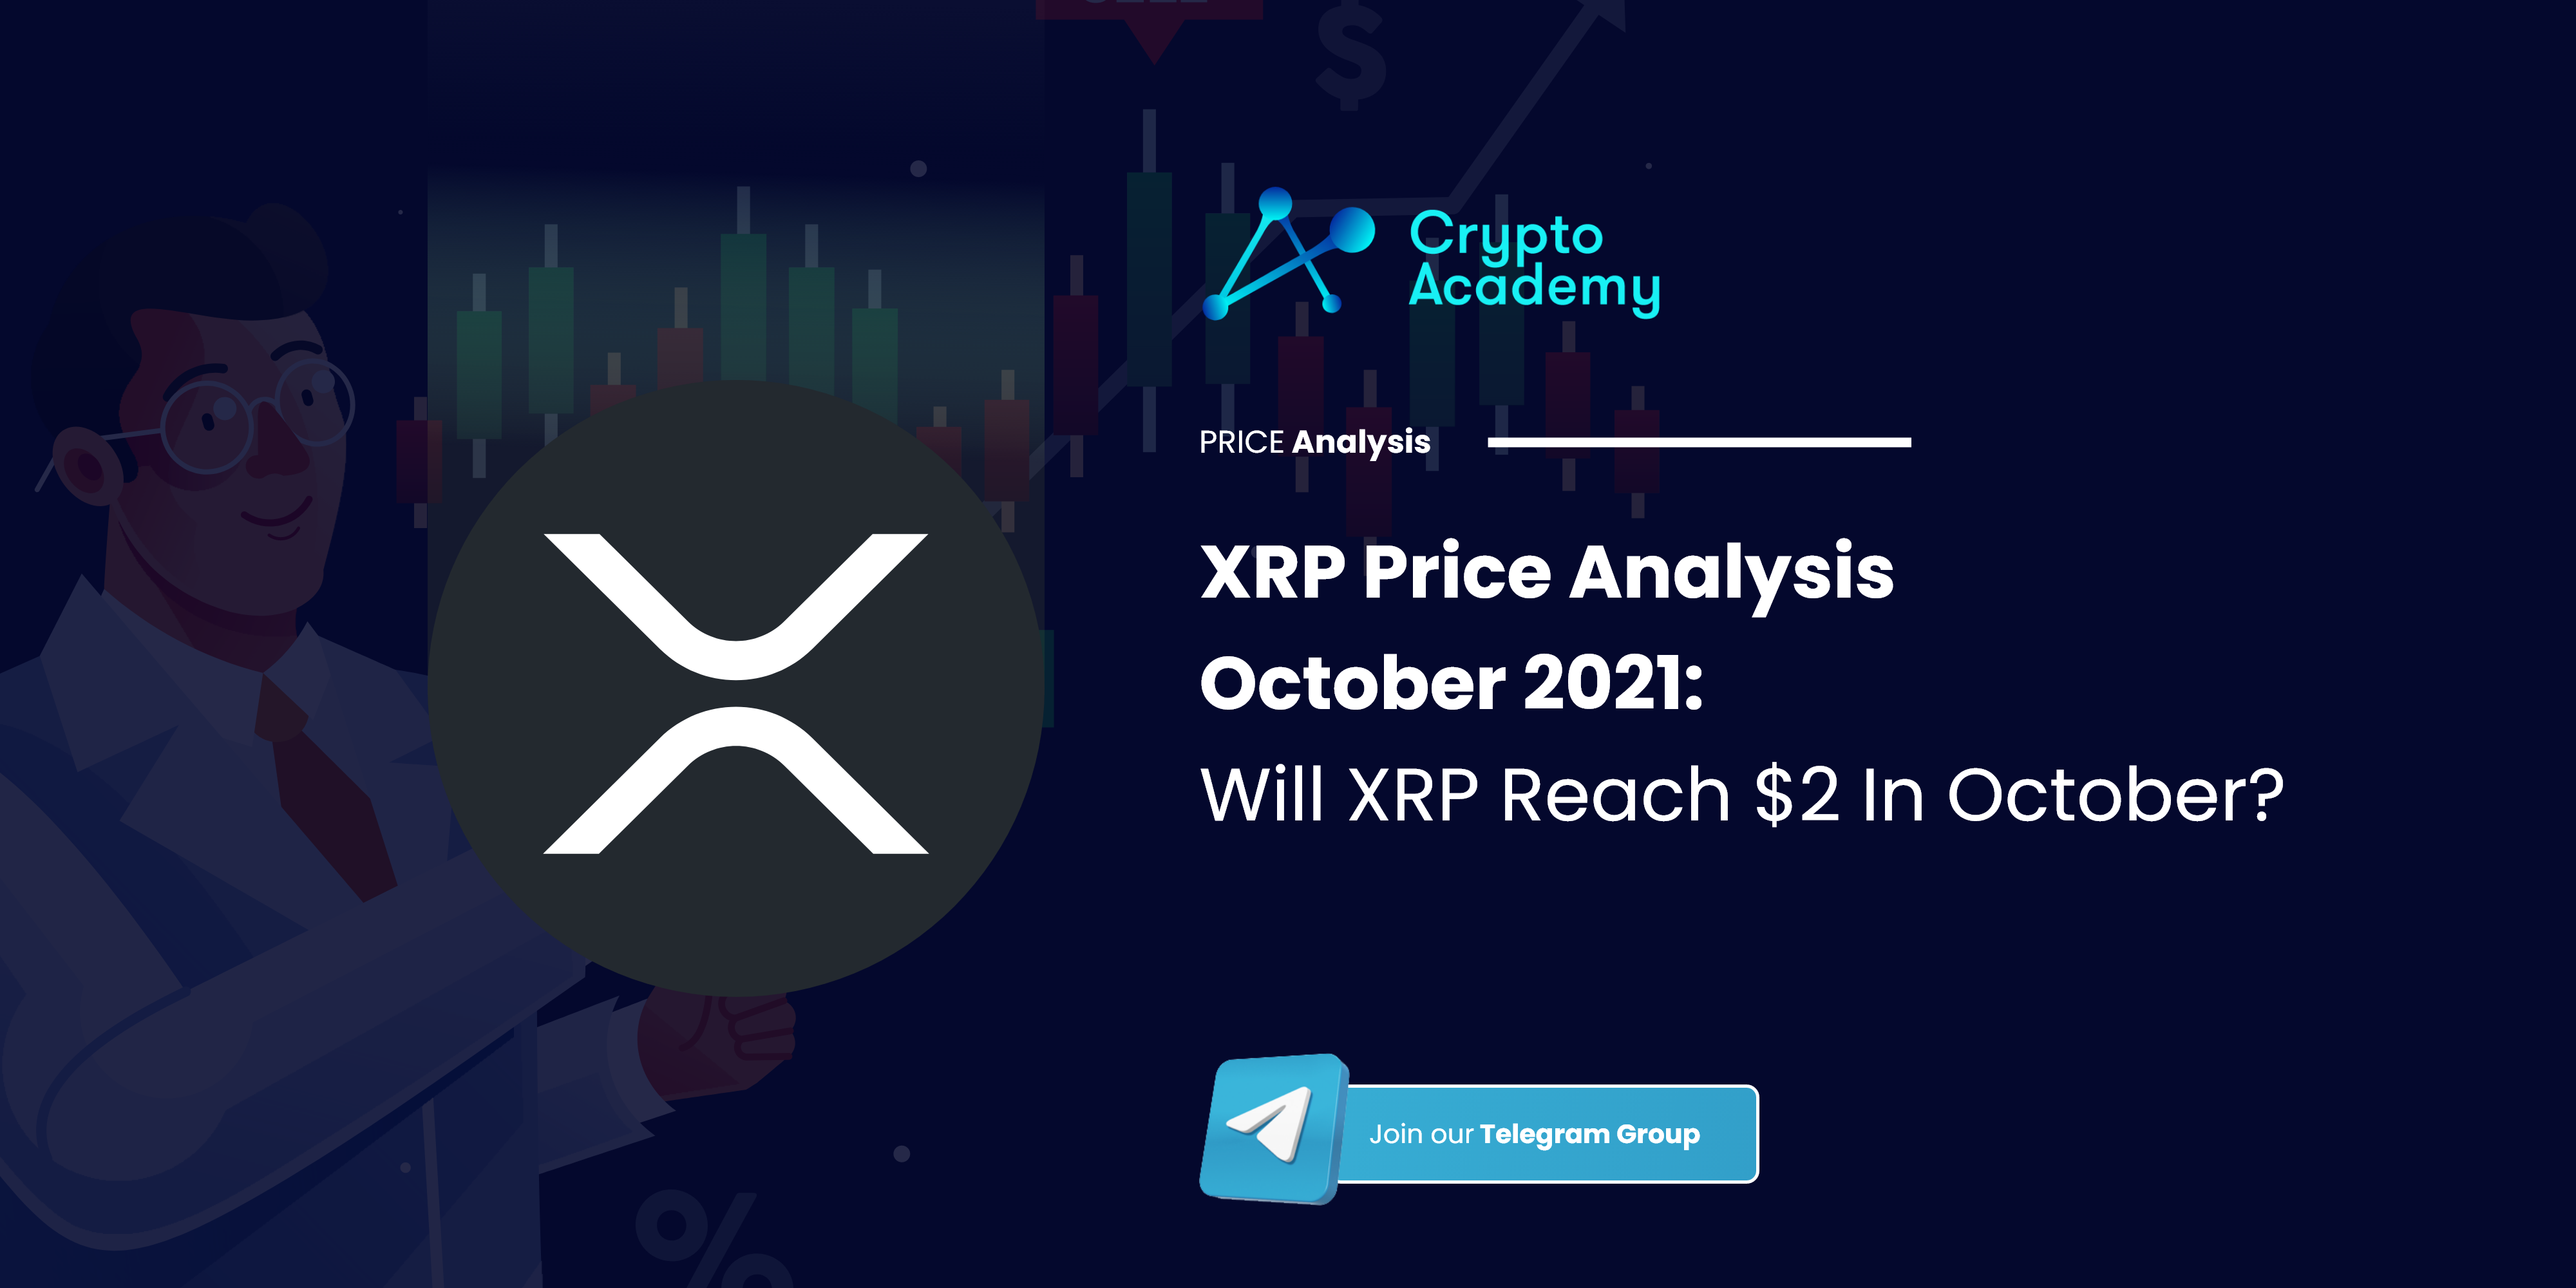 XRP Price Analysis October 2021: Will XRP Reach $2 In October?